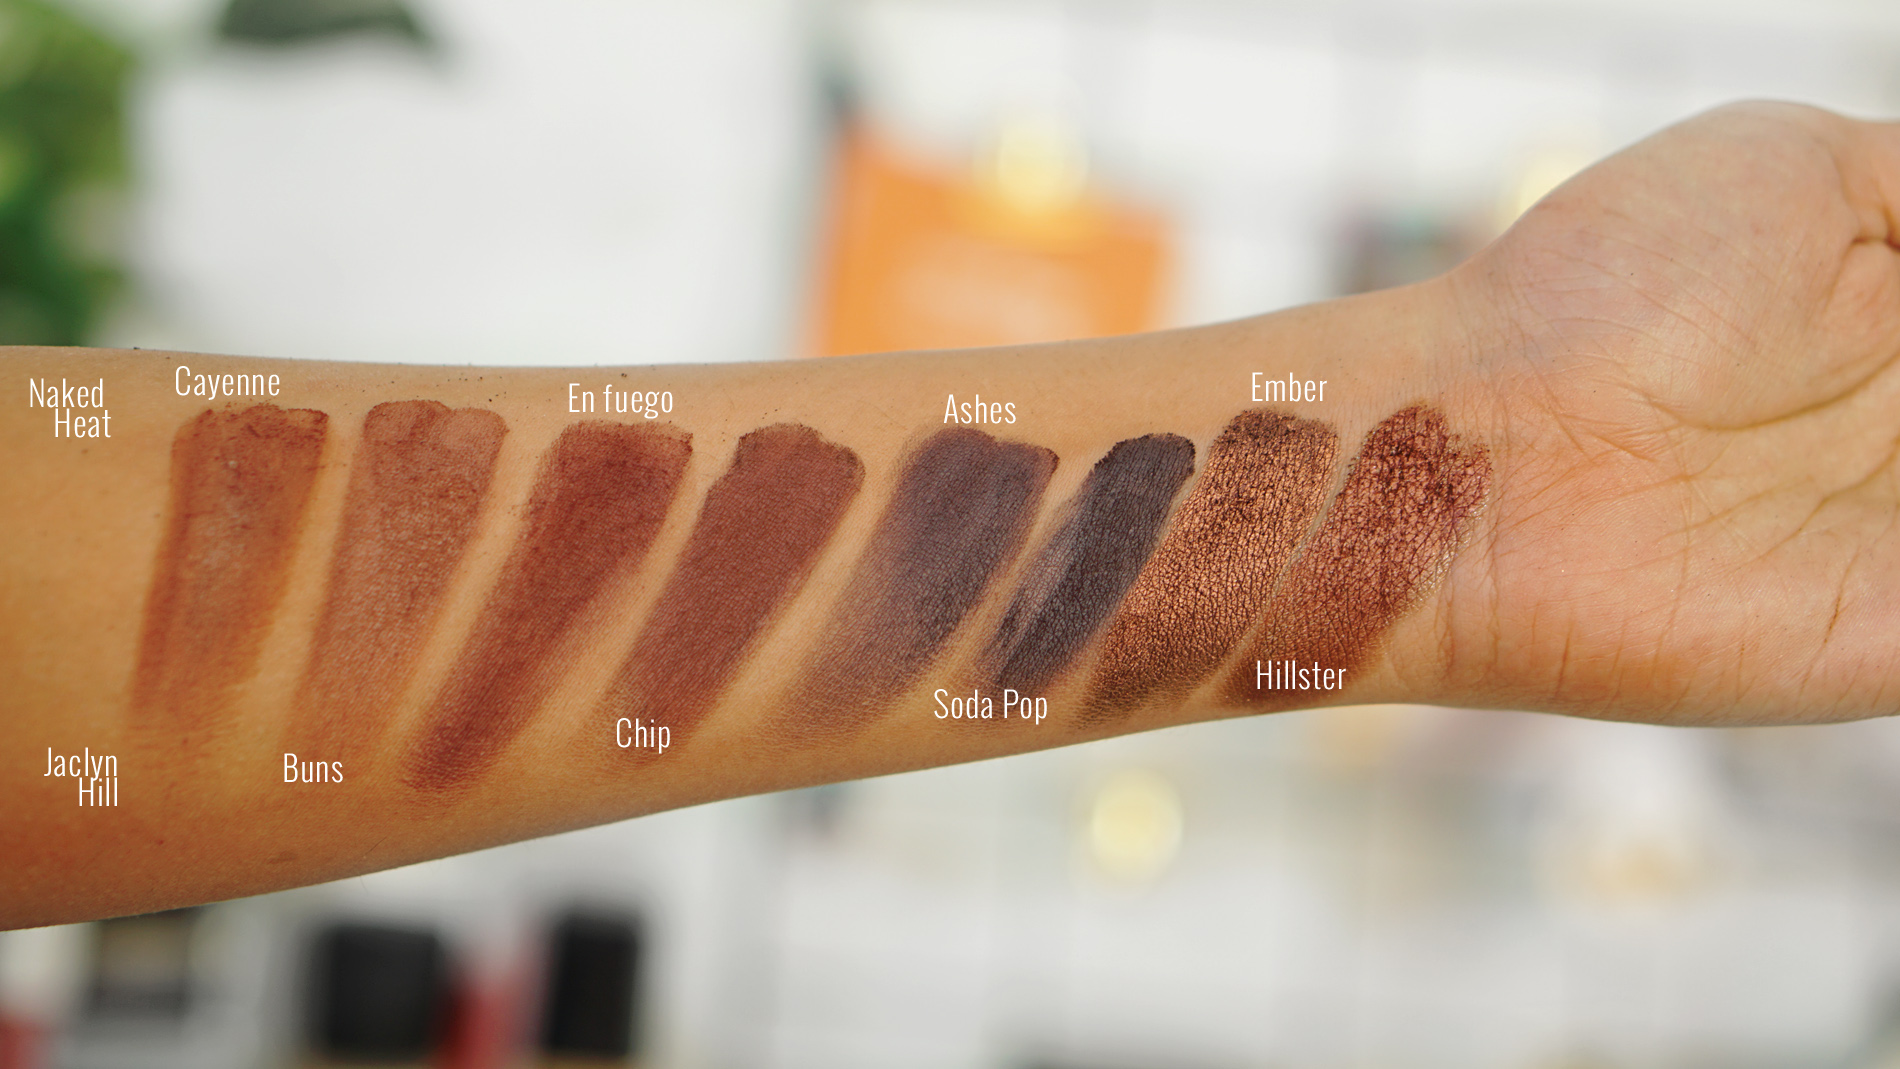 Urban decay naked heat vs morphe jaclyn hill swatches3